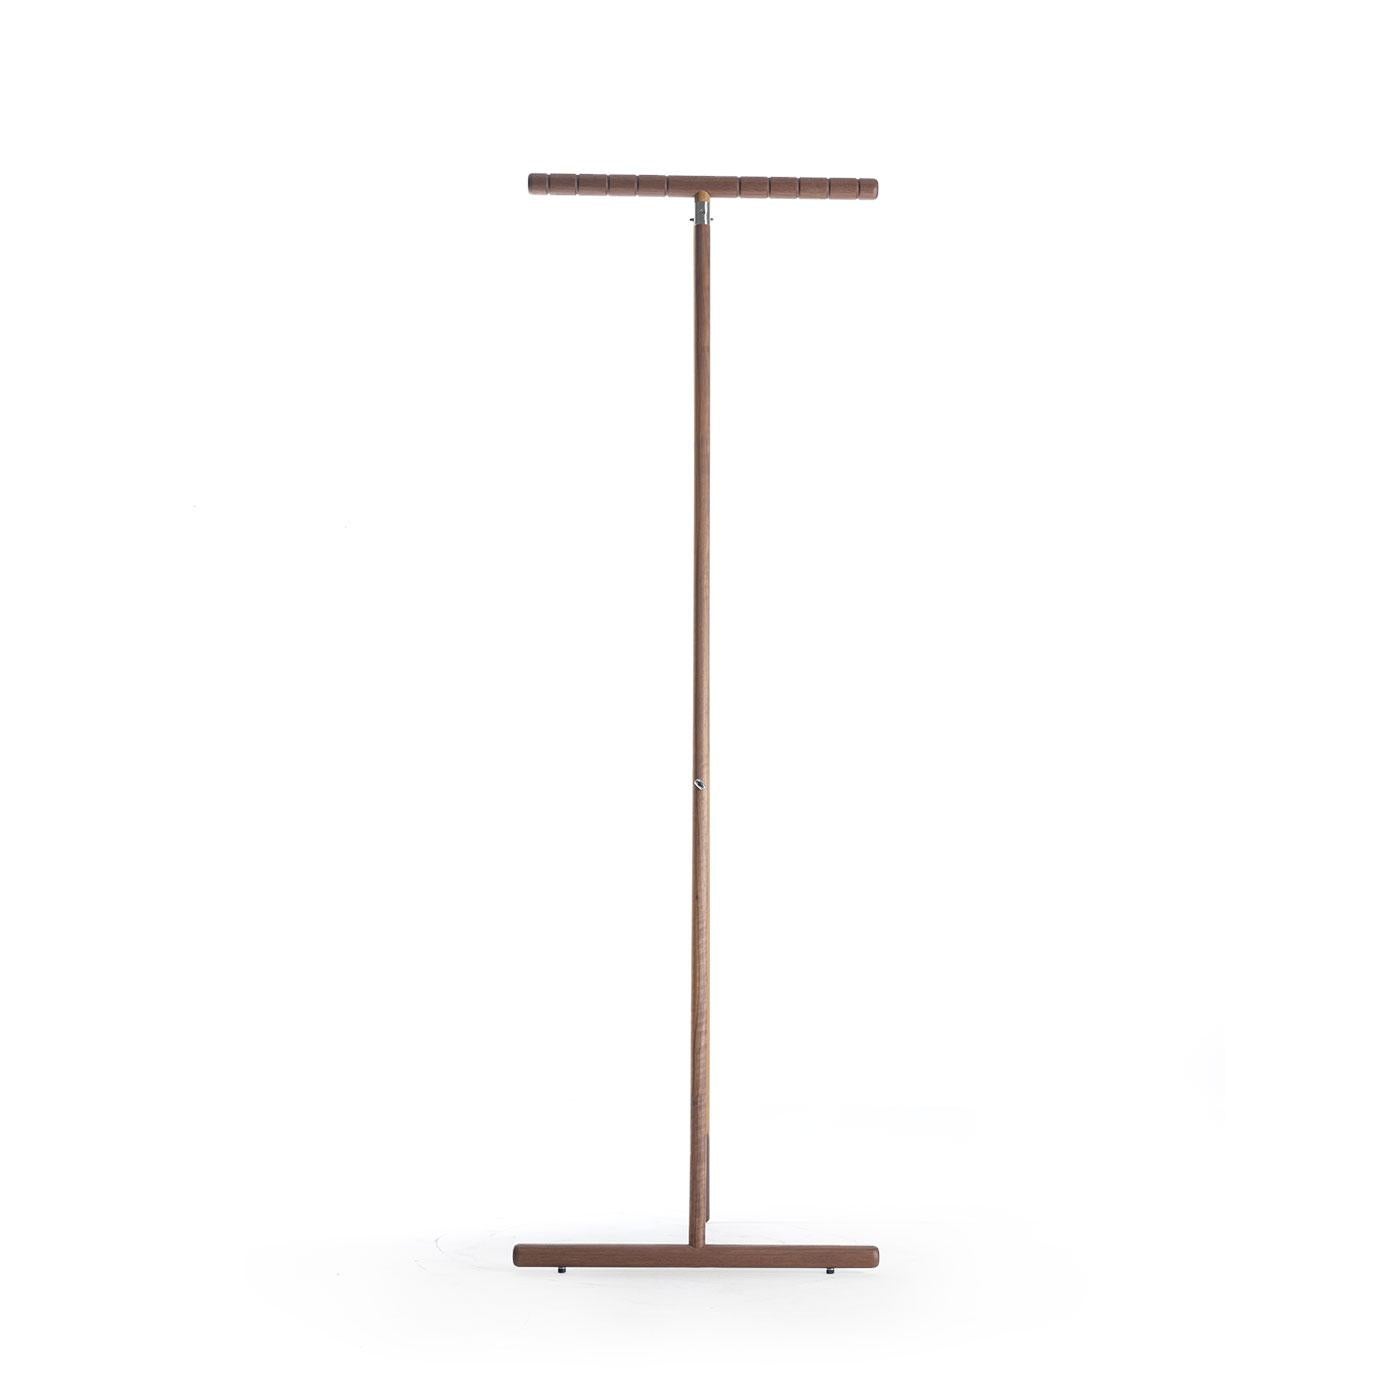 Modern Spalla Solid Wood Hanger, Walnut in Hand-Made Natural Finish, Contemporary For Sale